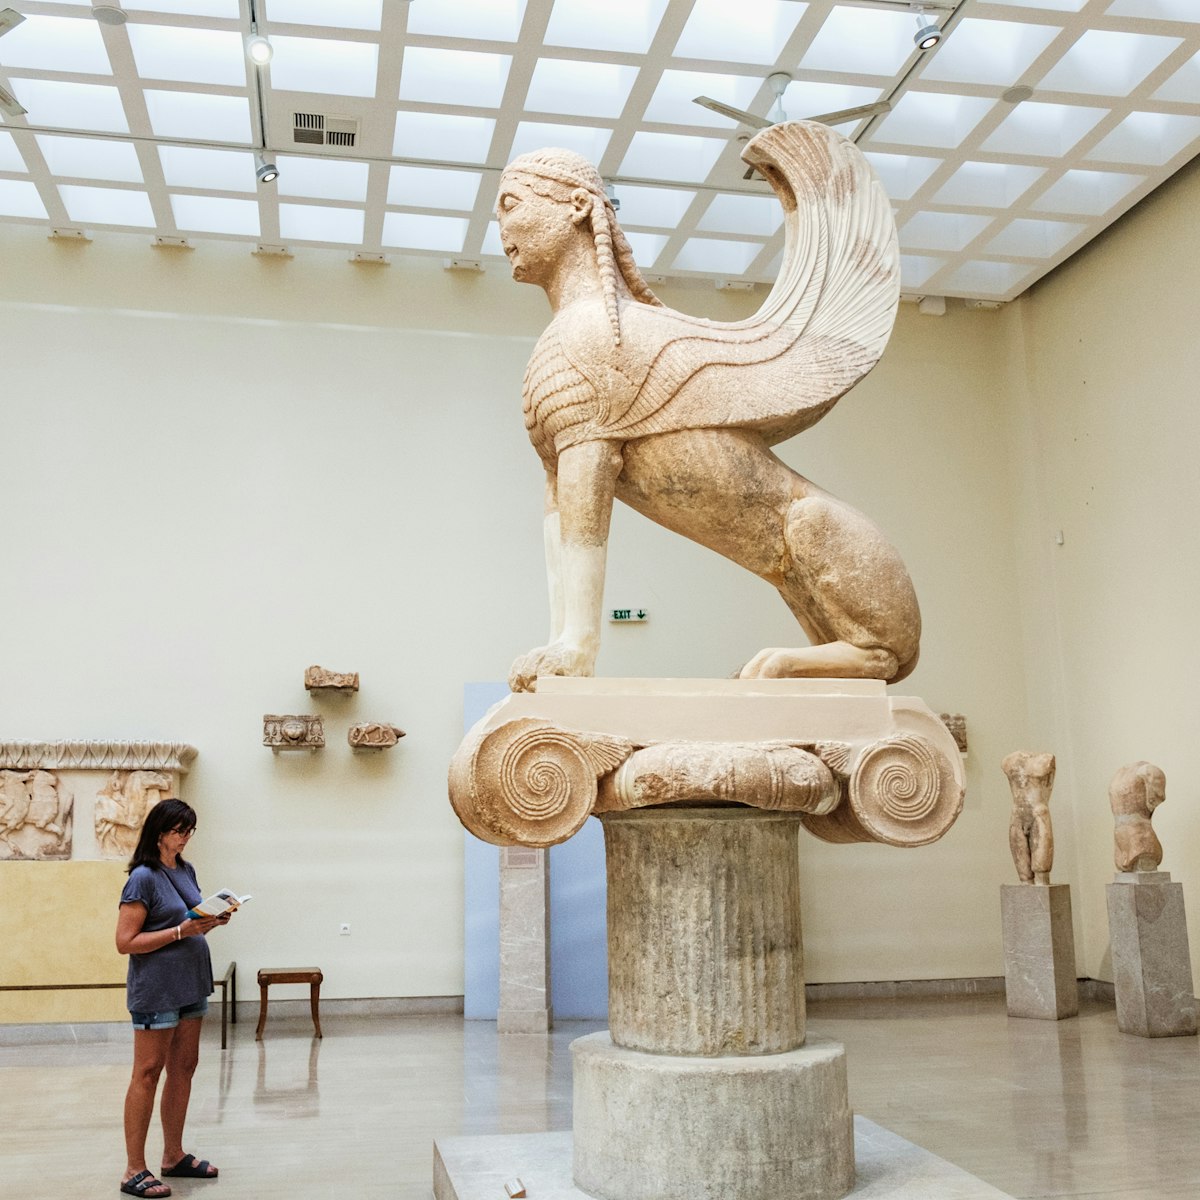 Delphi, Greece - September 21, 2017: The mythical Sphinx of Naxos statue stands on the pedestal in Archaeological museum,Delphi, Greece; Shutterstock ID 1071661235; your: Erin Lenczycki; gl: 65050; netsuite: Digital; full: poi
1071661235